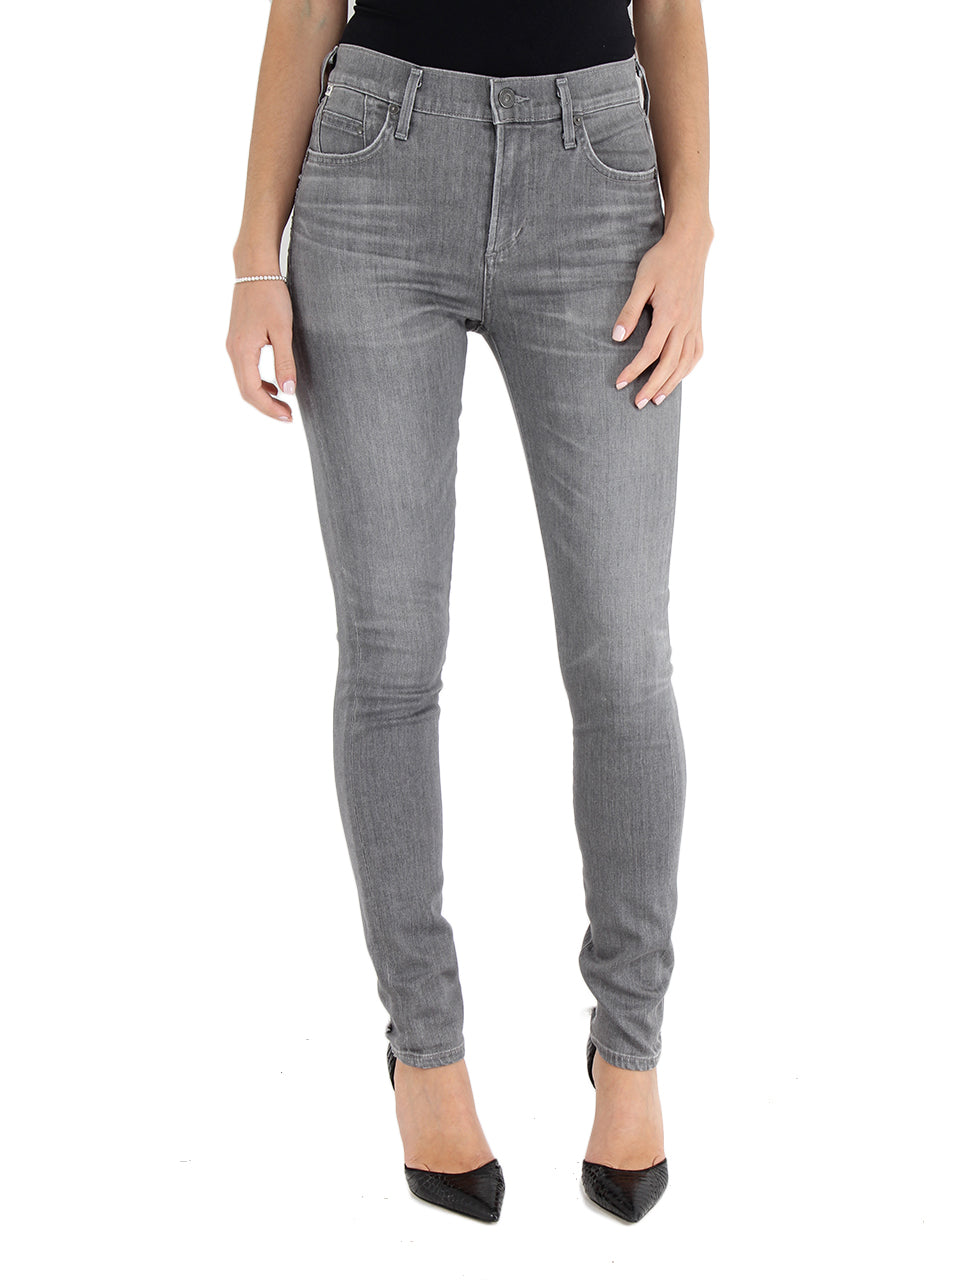 Rocket High Rise Skinny in Statuette - CITIZENS OF HUMANITY